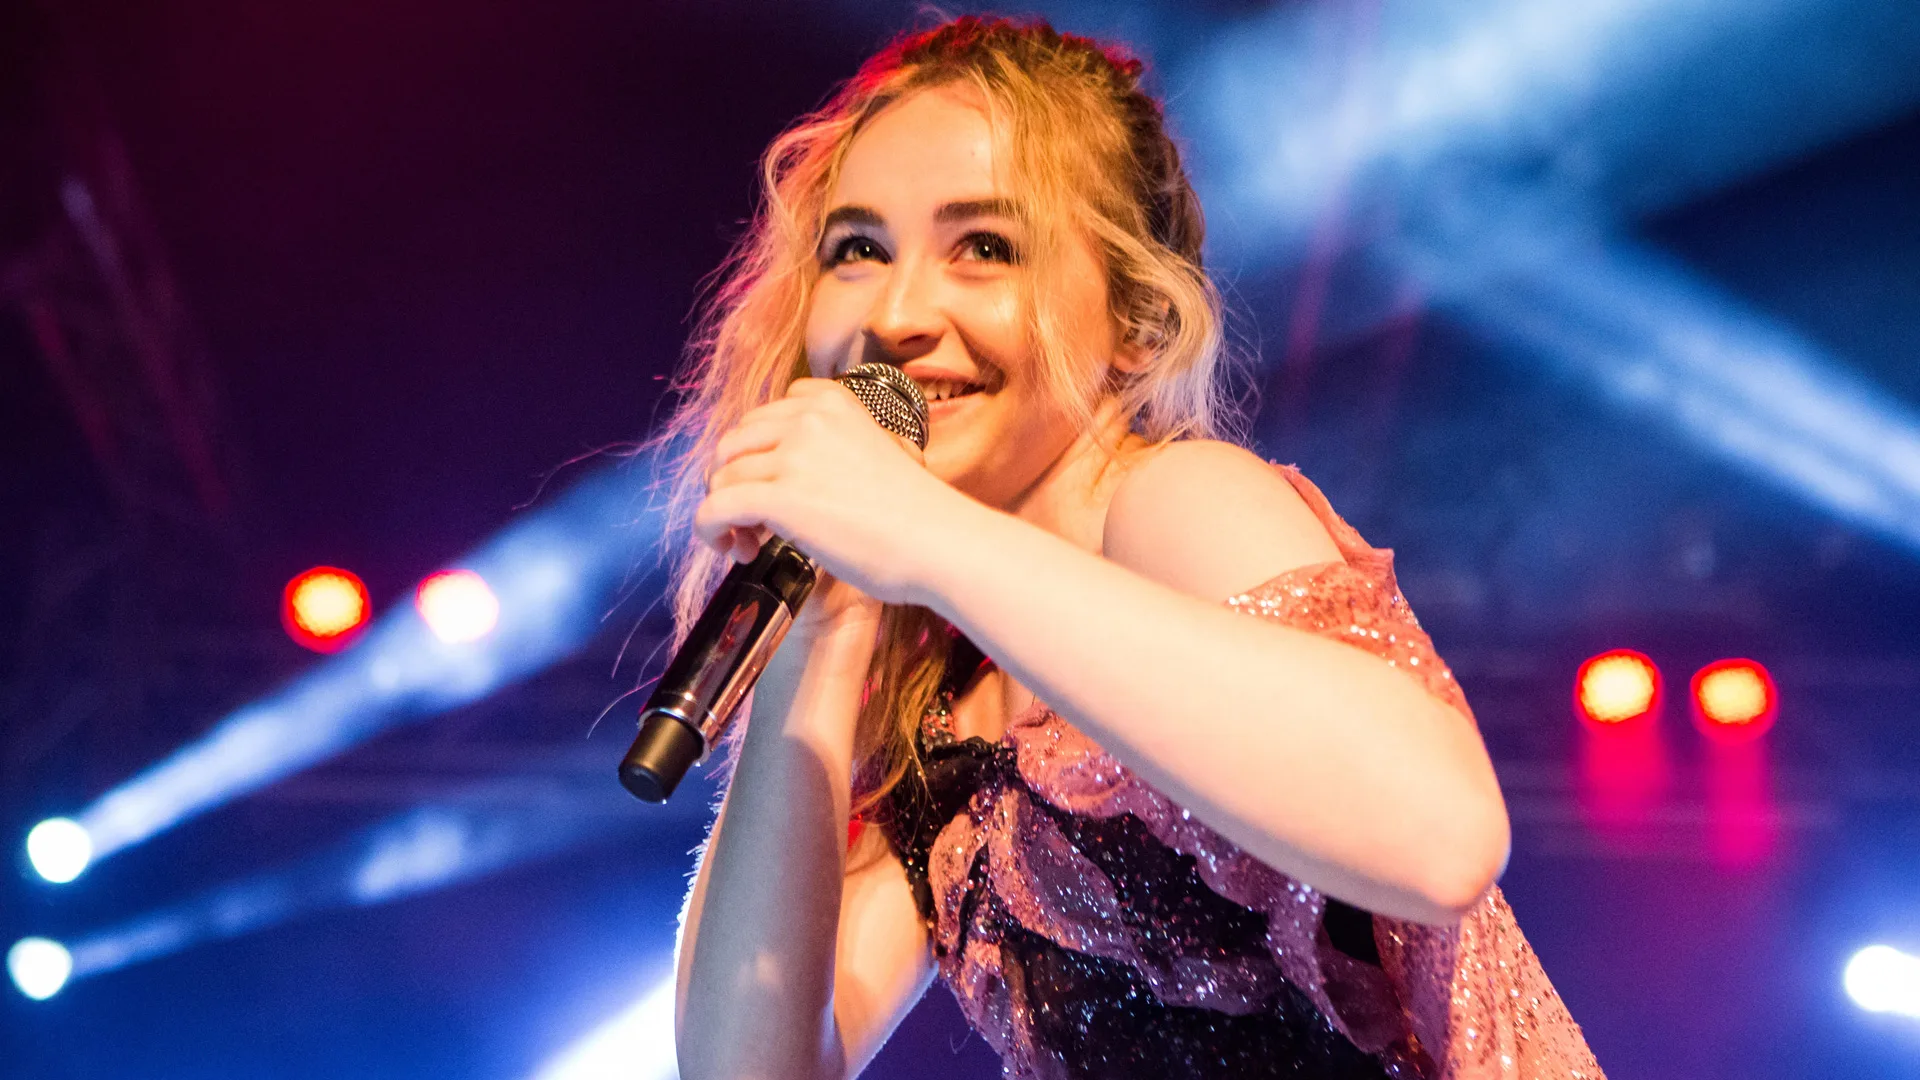 A photo of Sabrina Carpenter mid-performance smiling into the mic against a blue lit background